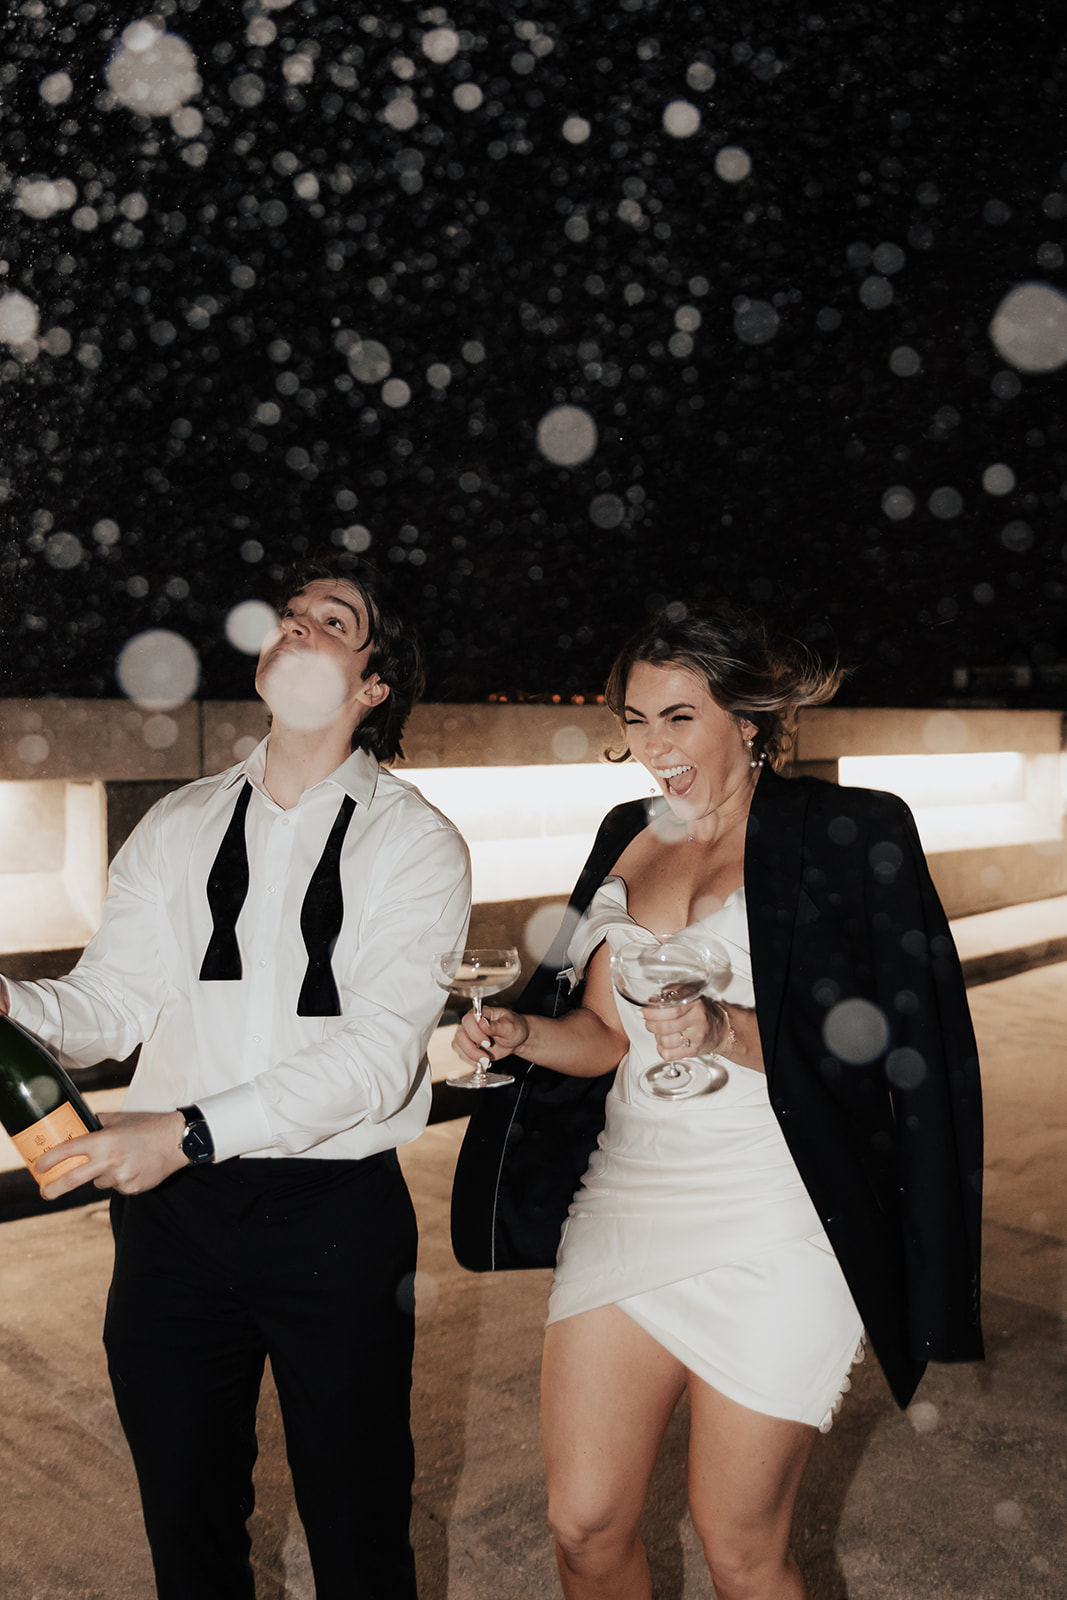 Couple sparying with champagne on top of a parking garage during Charleston engagament session. Woman hlding glasses and has jacket above her white dress. Man with white shirt holding the bottle.